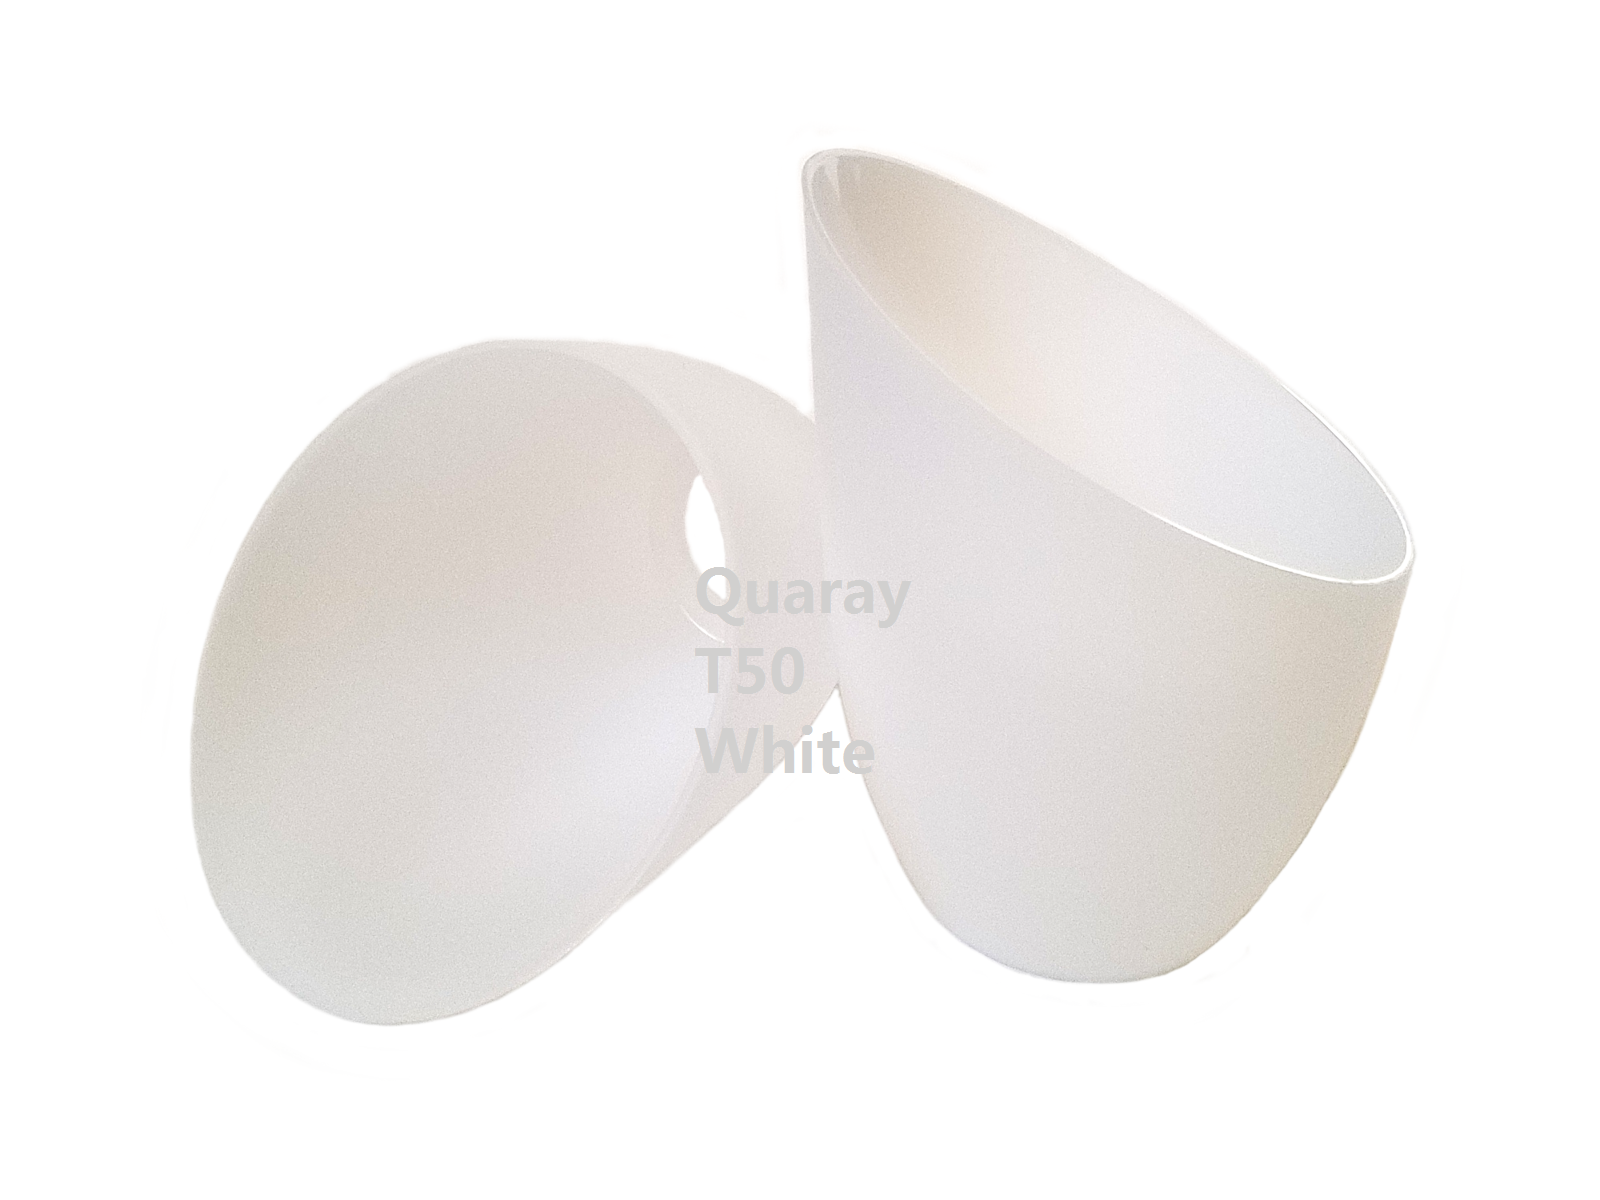 2-pack Quaray T50 White Plastic Lamp Shade For Torchiere Floor Lamp